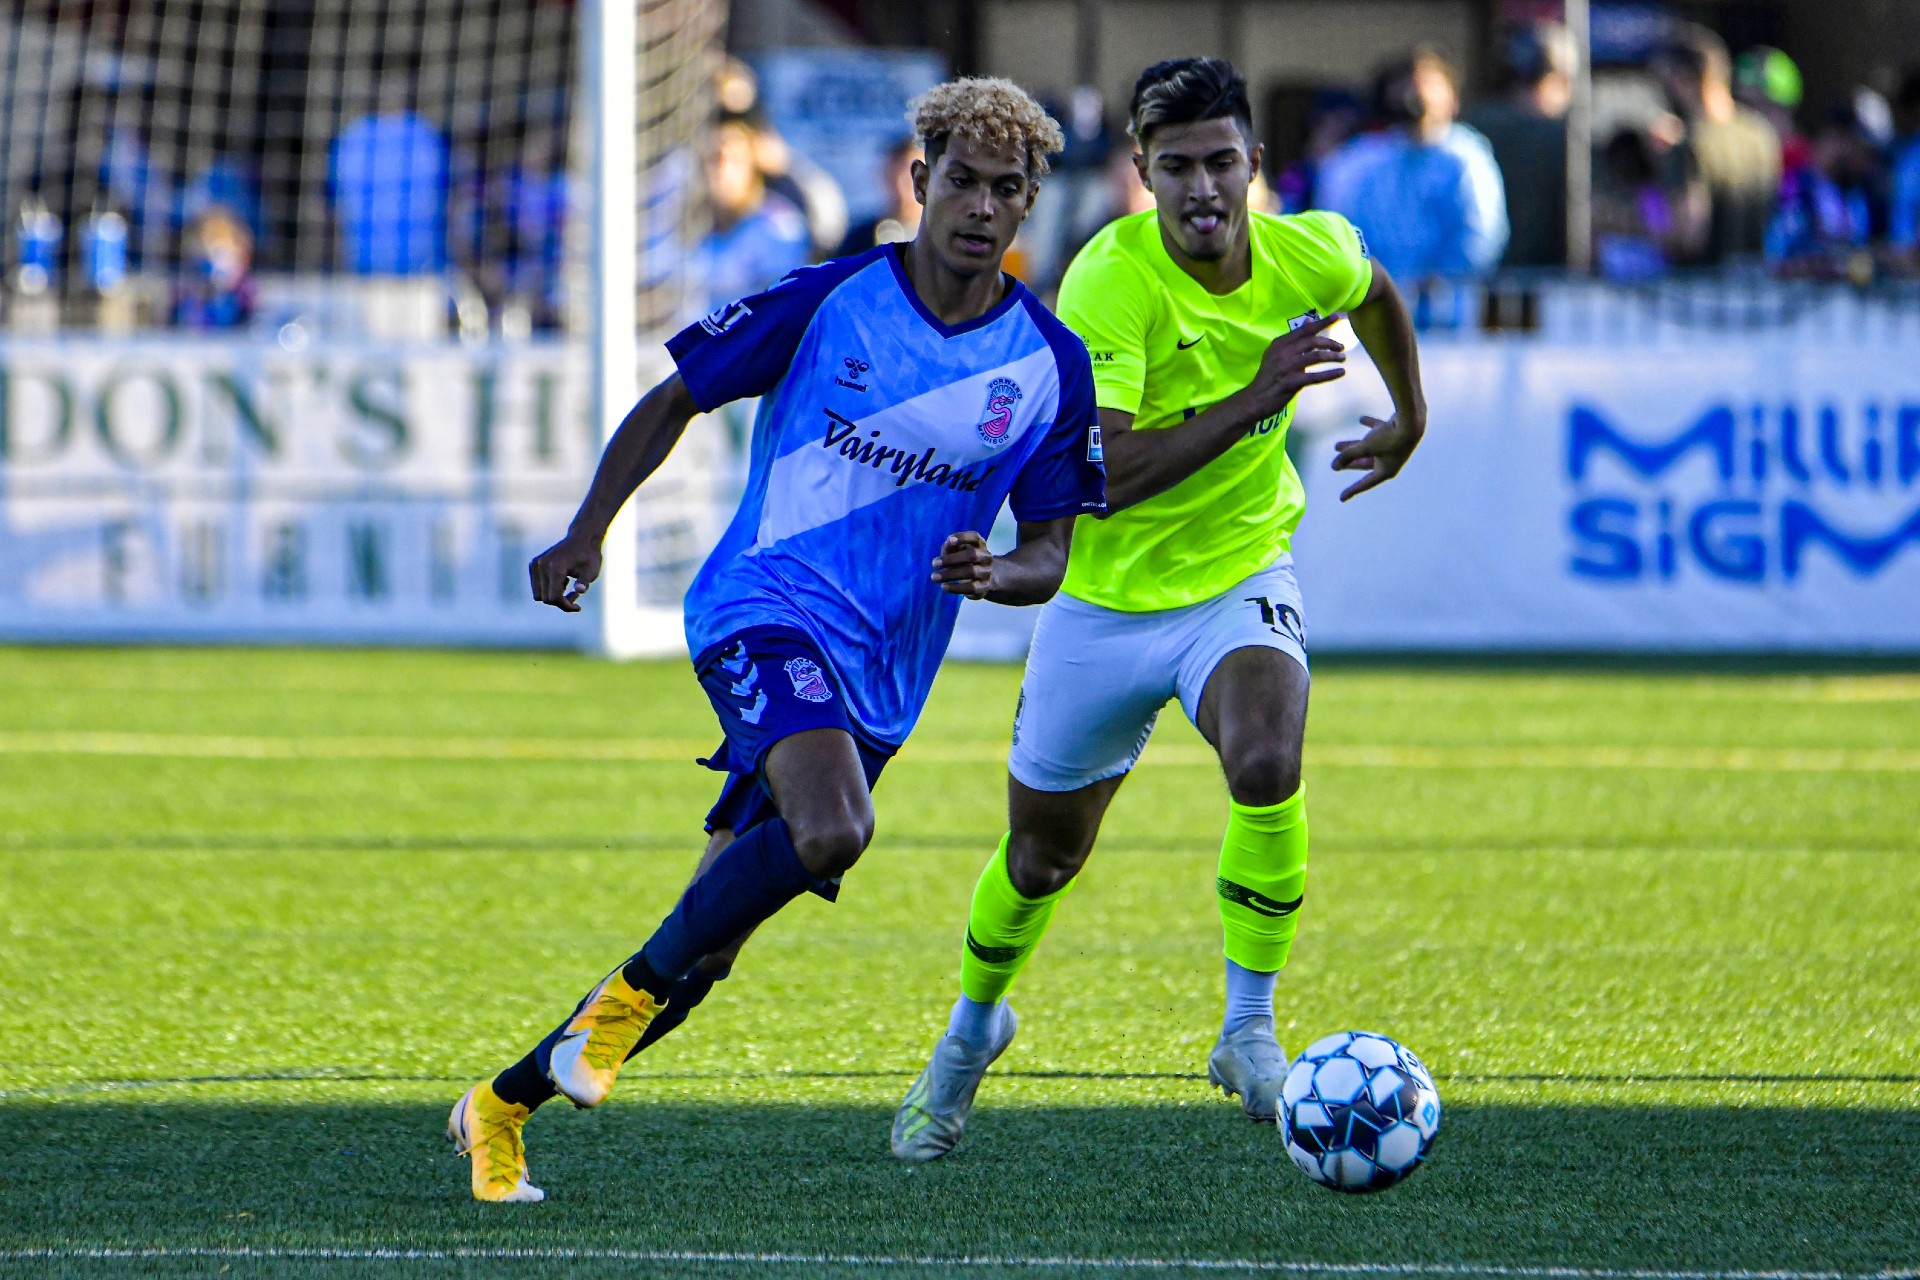 Forward Madison makes statement with win over unbeaten Union Omaha